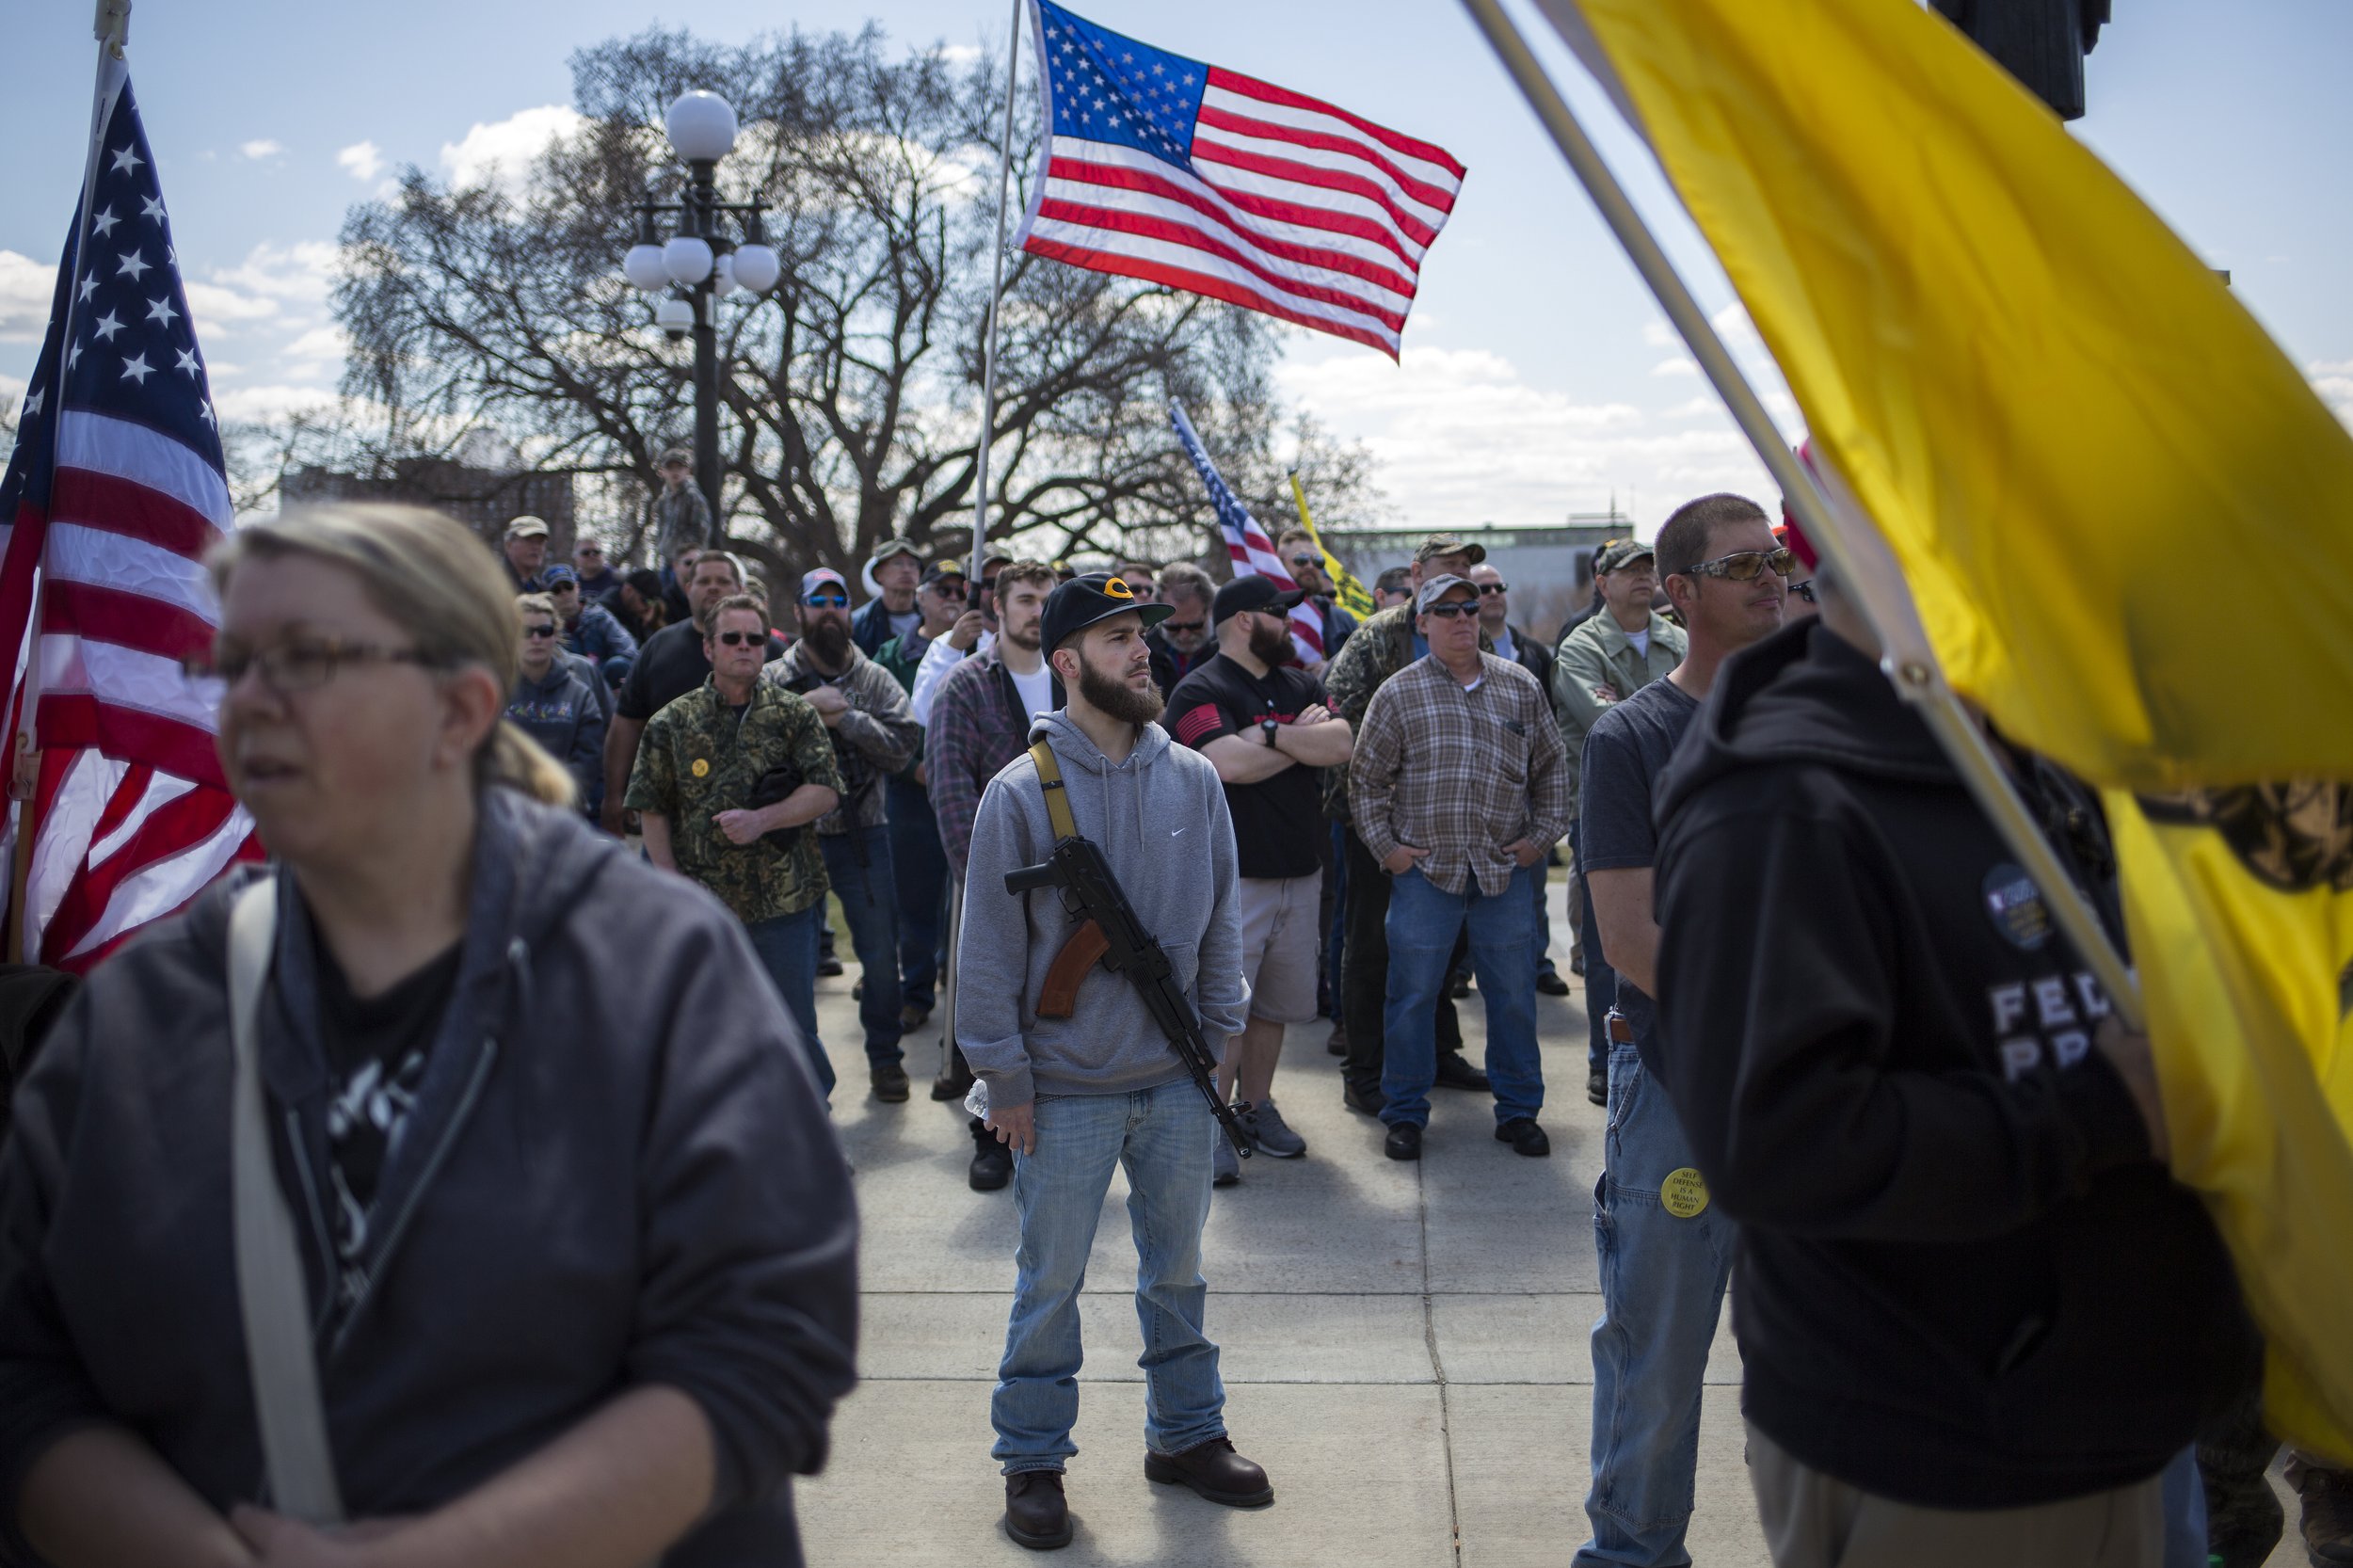  A man who asked not to be identified, center, sports a firearm alongside other demonstrators on the steps of the Minnesota Capitol building in St. Paul on Saturday, April 28, 2018. The rally, organized by the National Rifle Association and the Minne